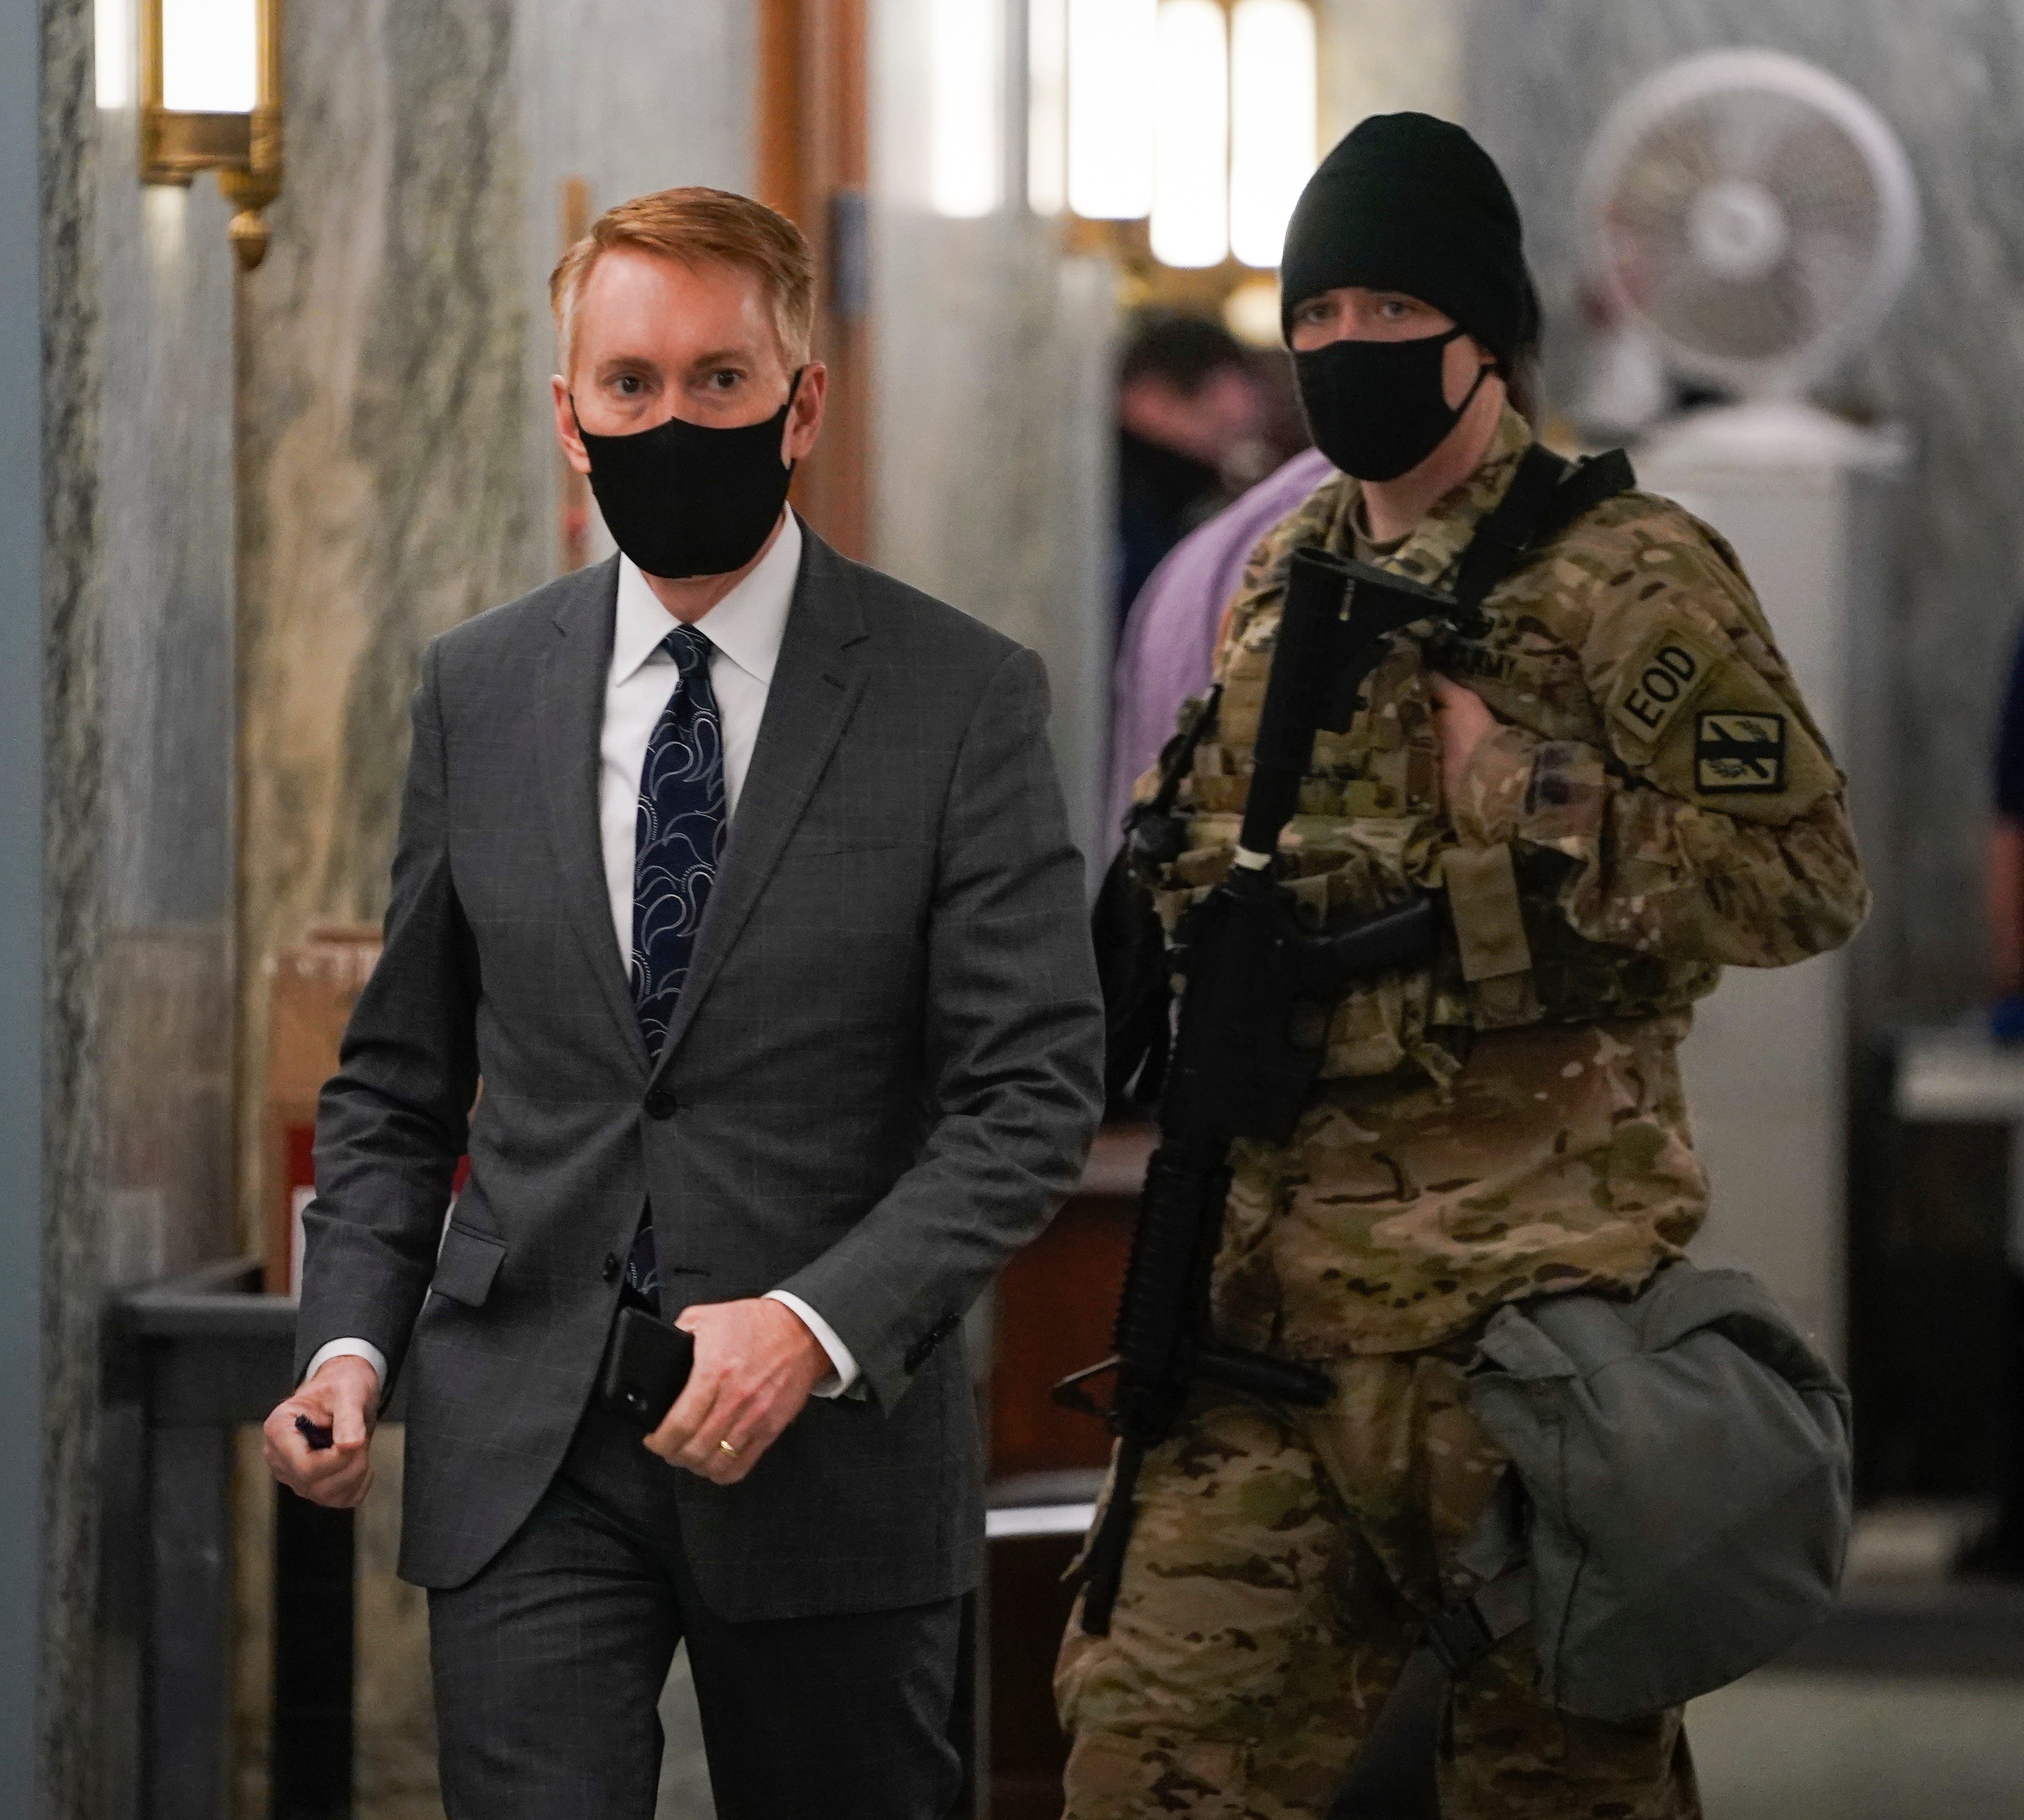 Sen. James Lankford arrives for a committee hearing on the Jan. 6 attack on the U.S. Capitol as members of the National Guard navigate and walk through the Dirksen Senate office building on Feb. 23.